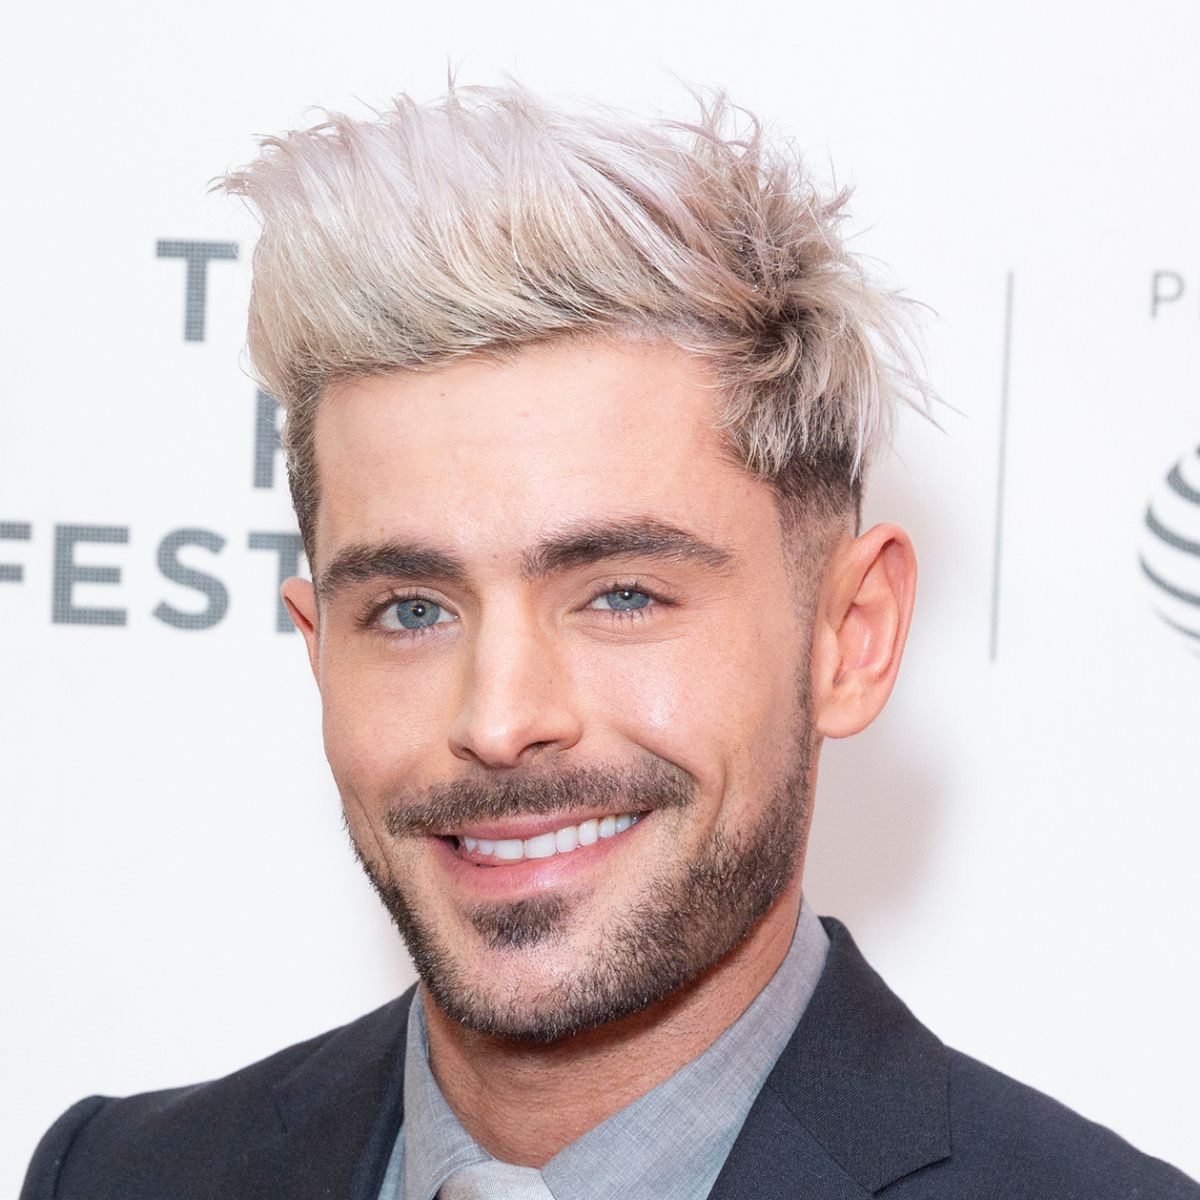 zac-efron-bleached-blonde-long-quiff-hairstyle-haircut-man-for-himself-ft.jpg